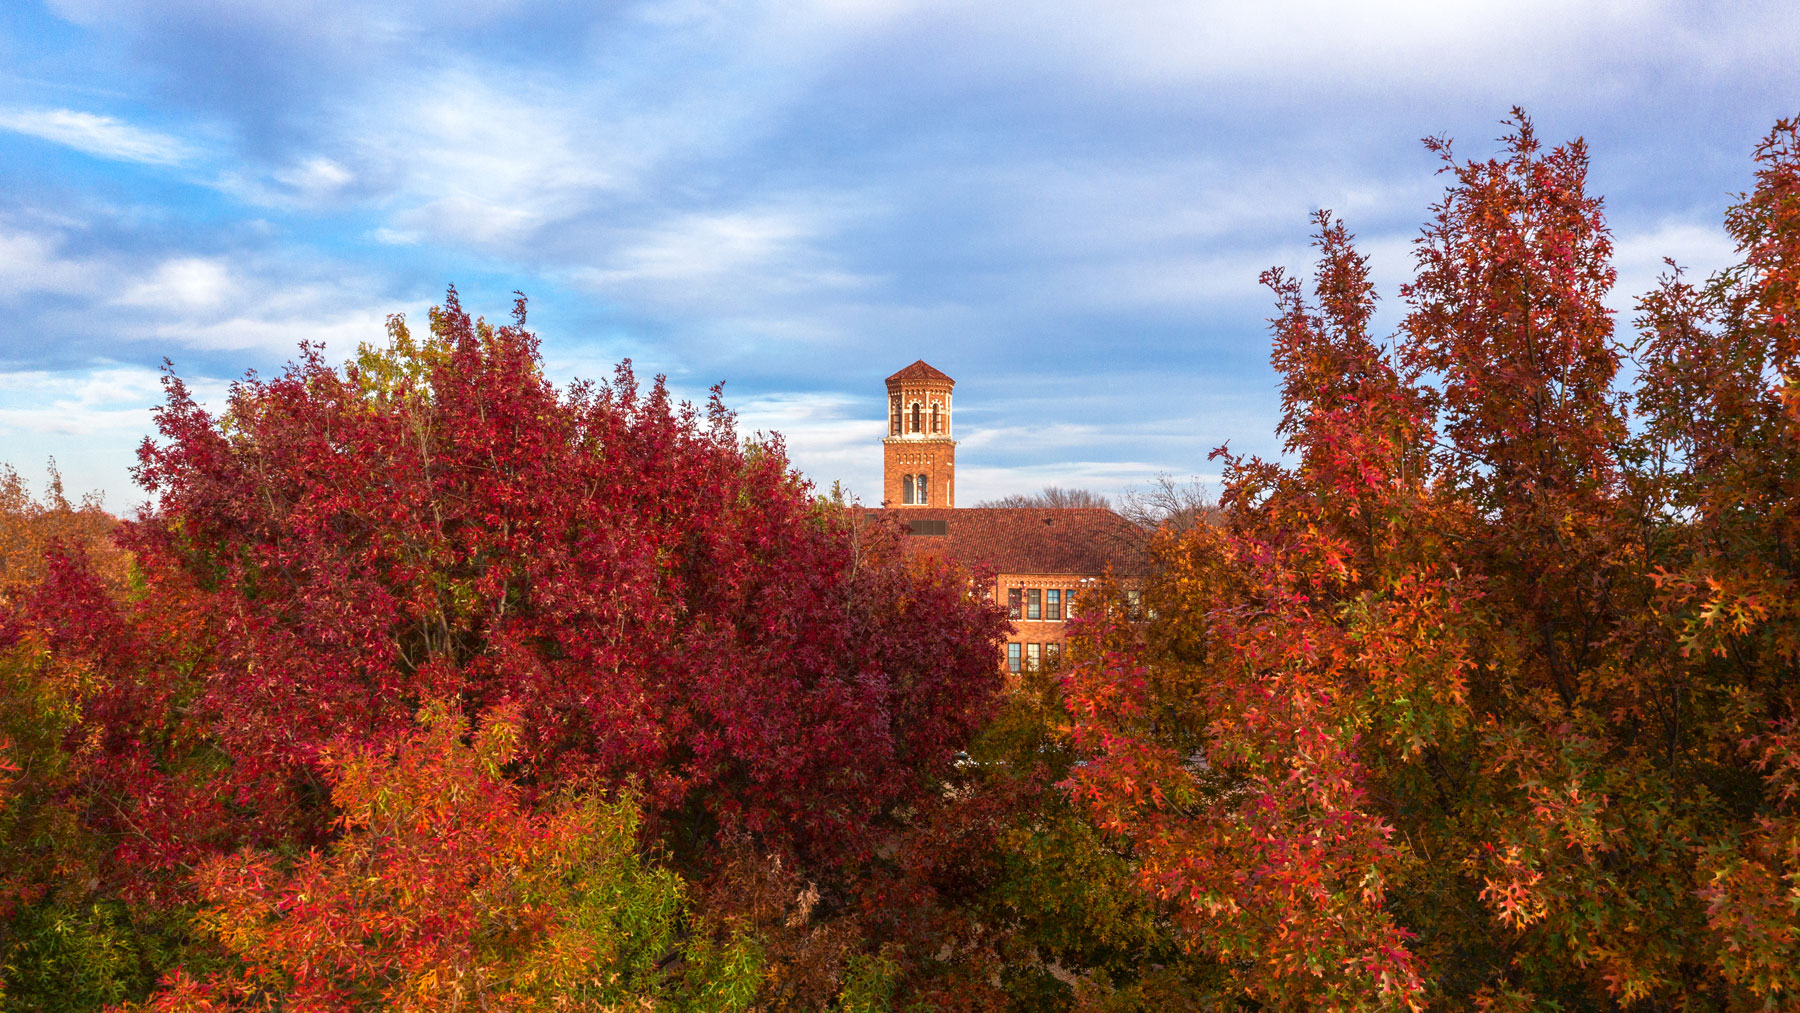 Hardin Tower in the distance between trees with the colors of autumn leaves.